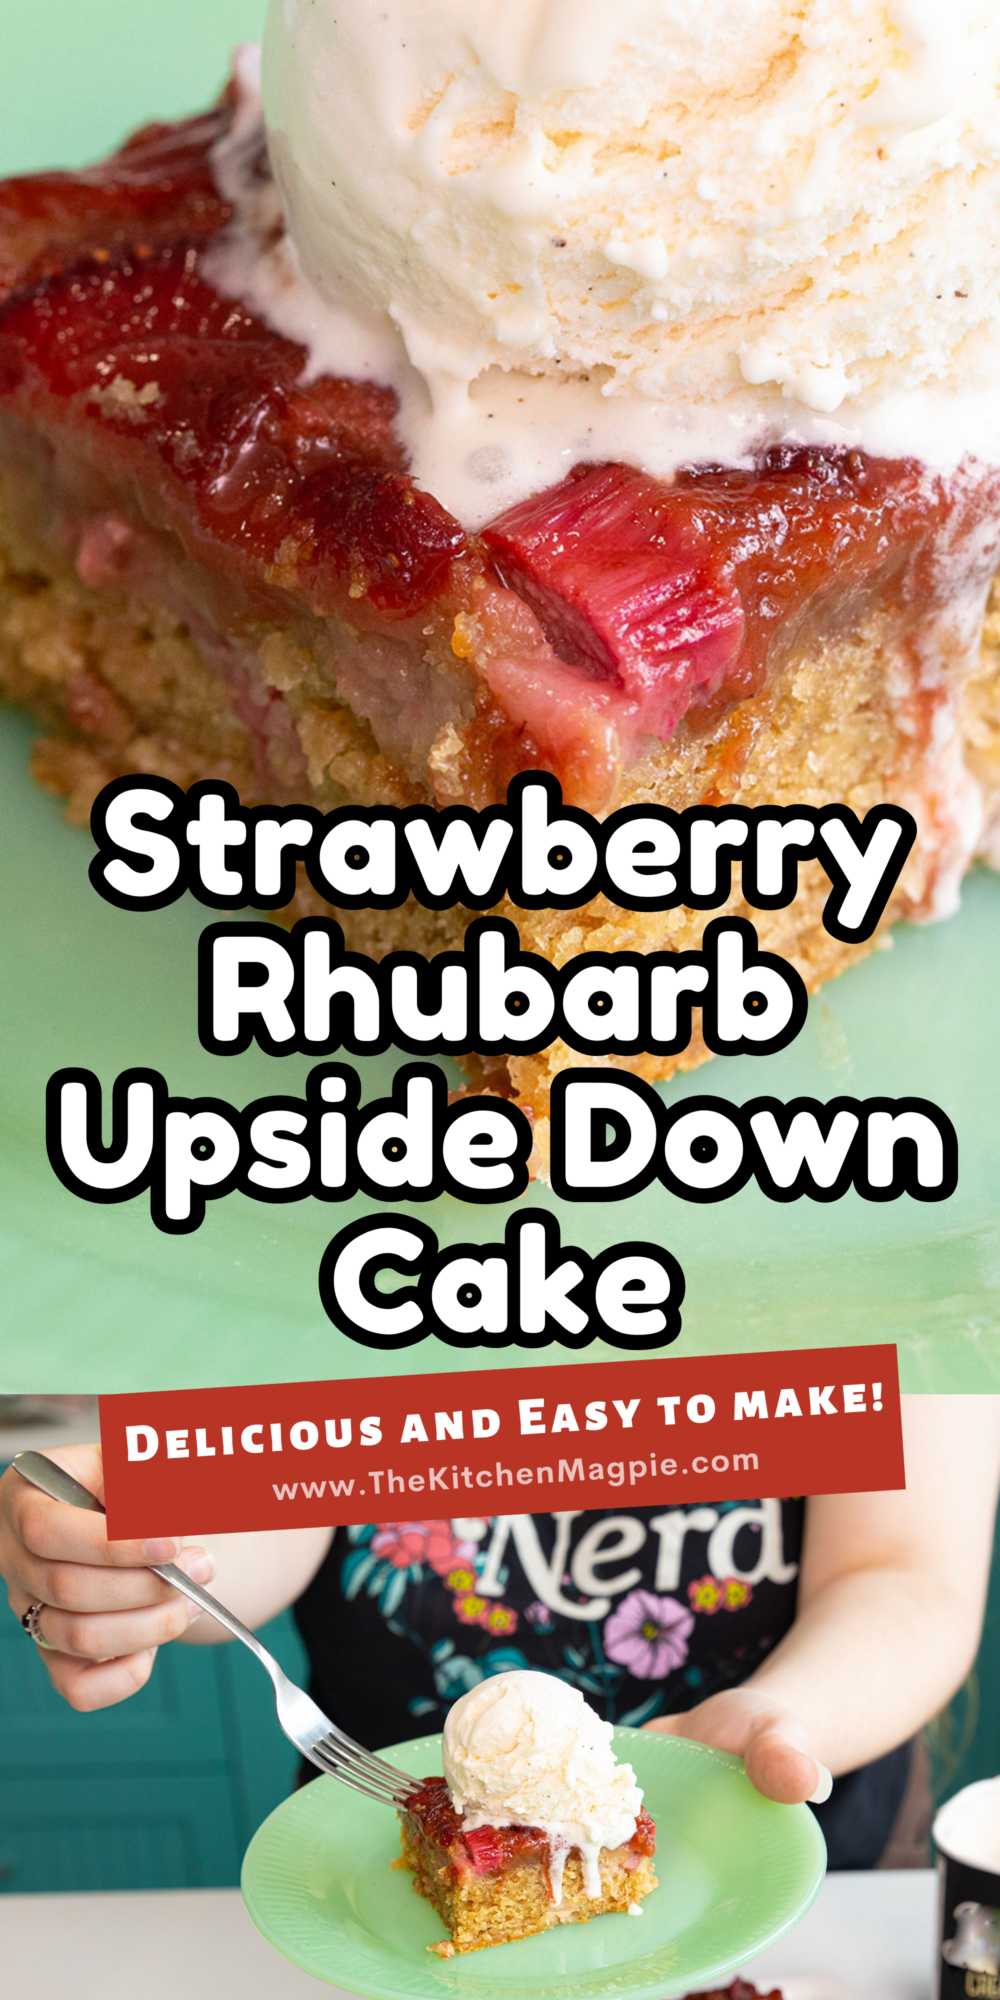 This delicious strawberry and rhubarb upside-down cake is the perfect way to use up your summertime rhubarb and strawberries! 